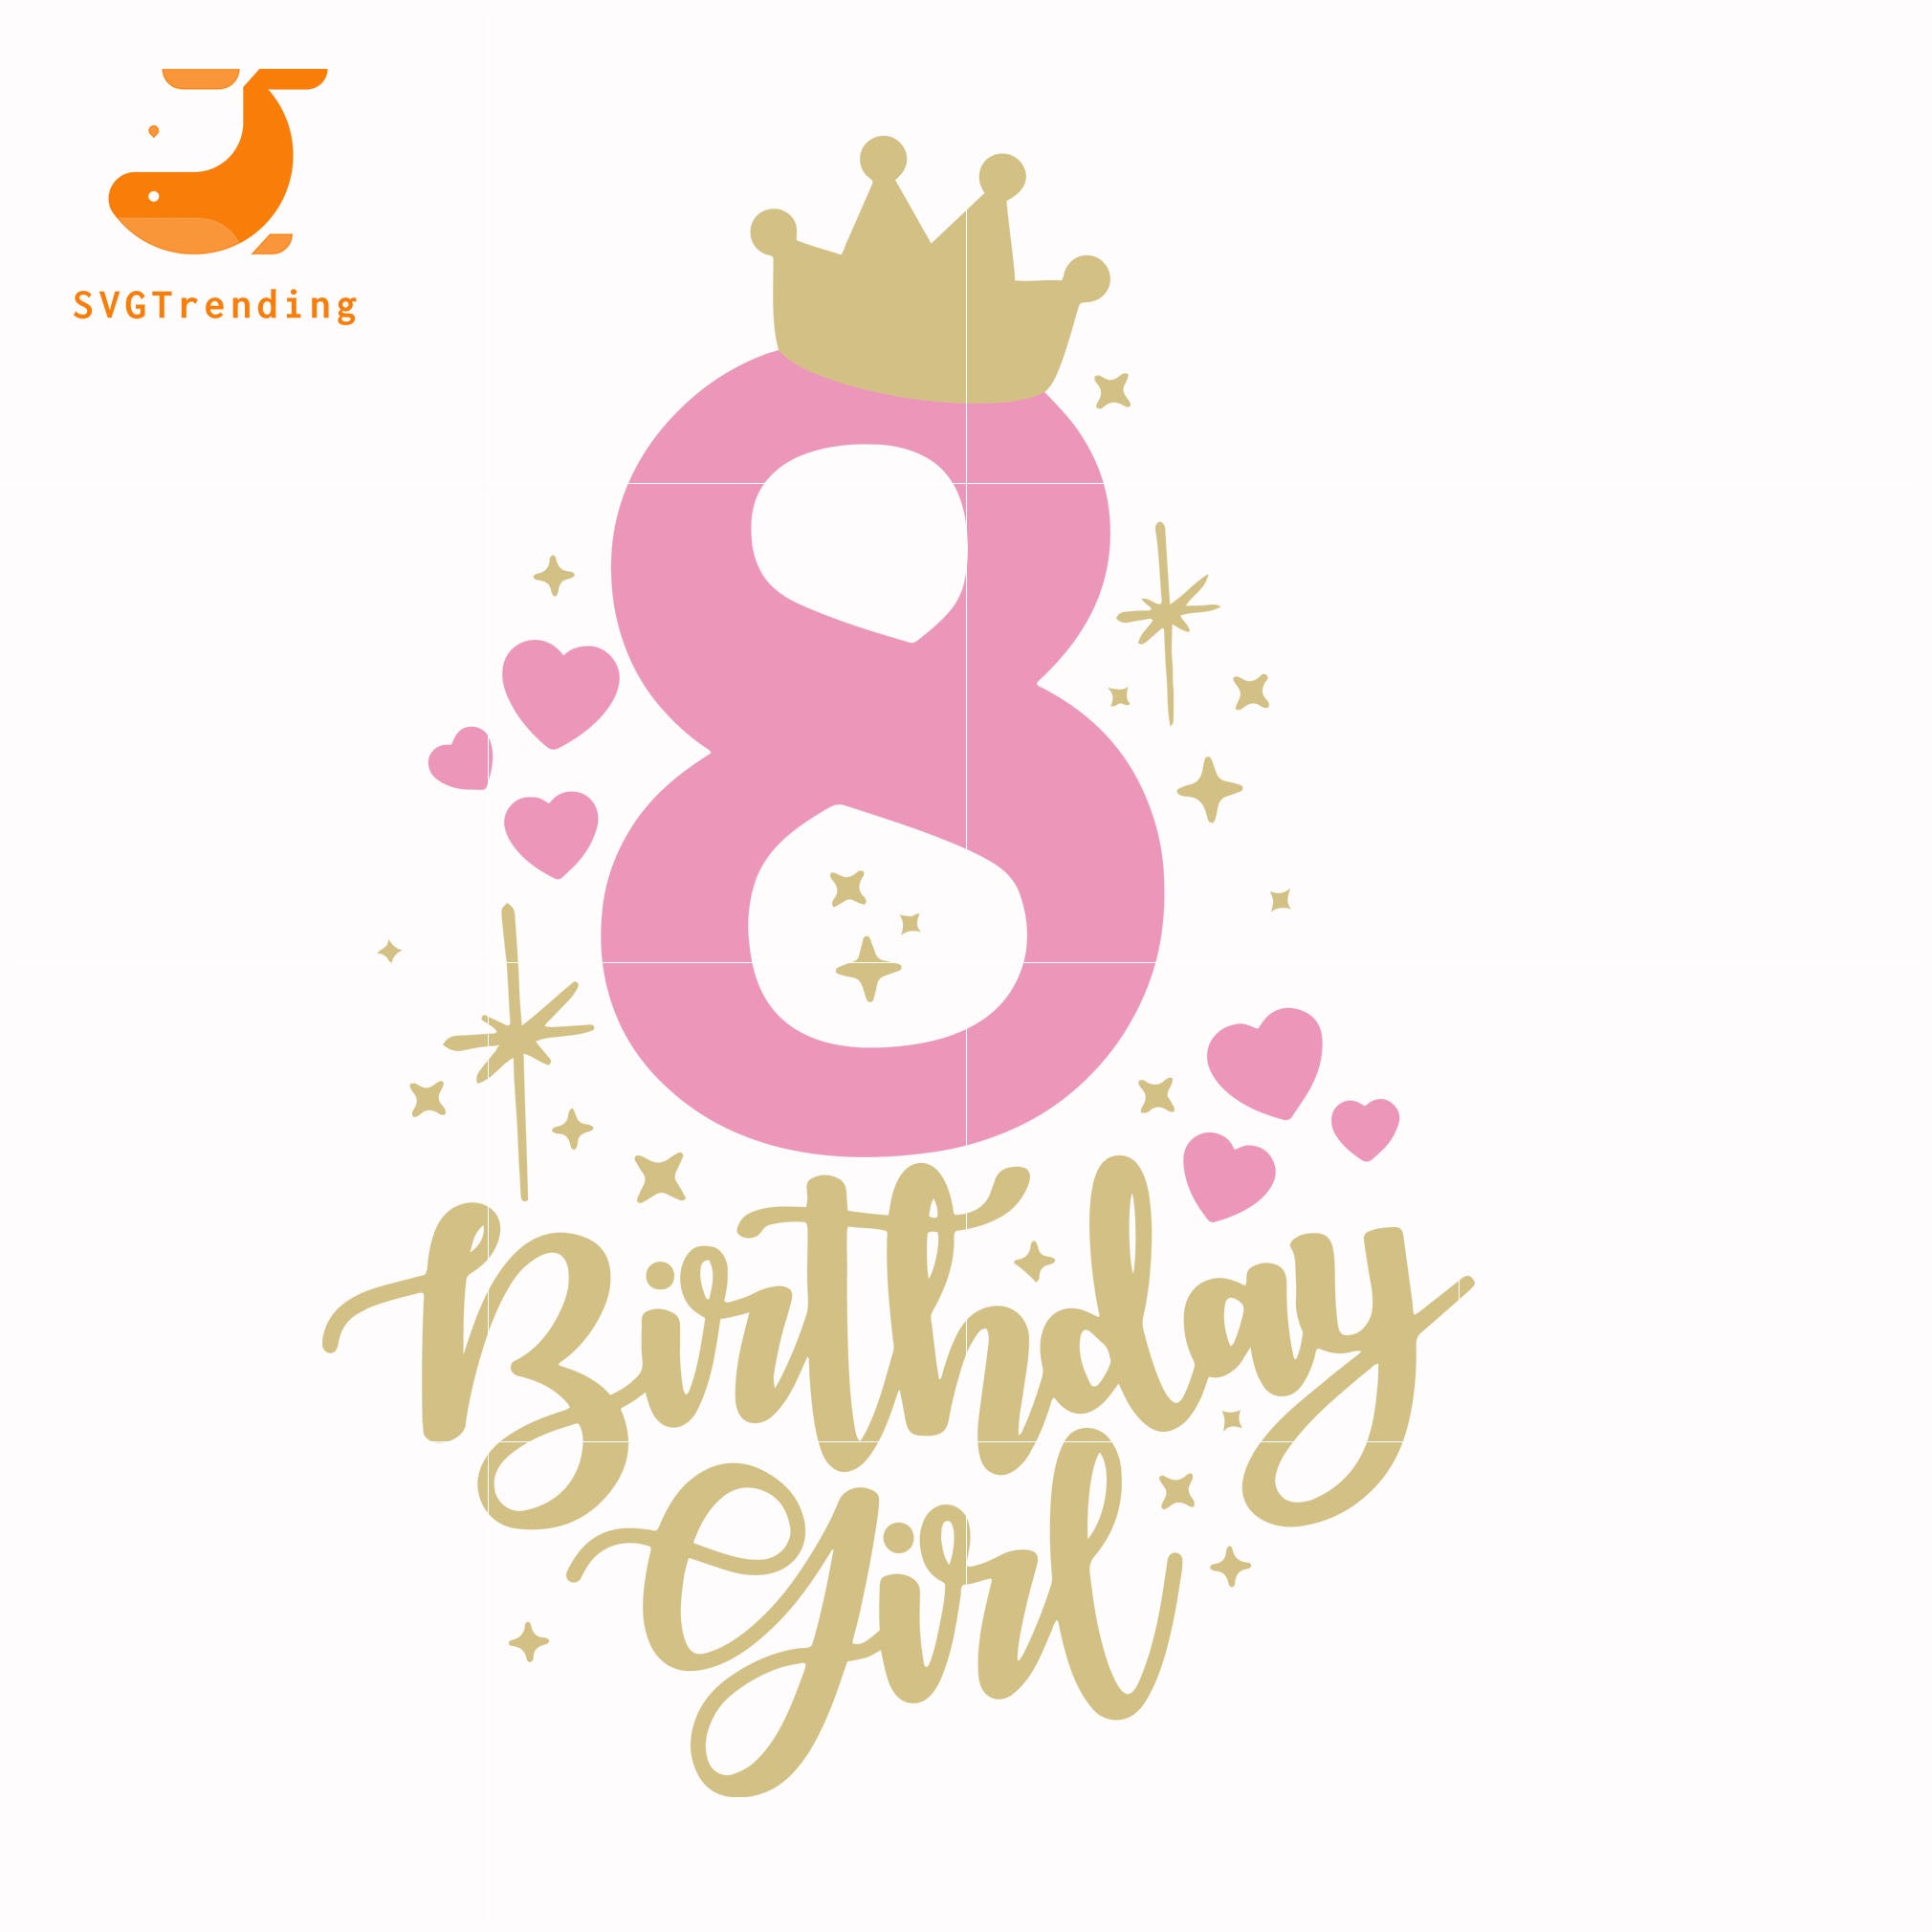 Download Girls Birthday Svg Cut Print File Eight Svg Dxf Eps Png Jpg Vector Clipart Eight Svg 8th Birthday Svg Eighth Birthday Svg Unicorn Svg Clip Art Art Collectibles